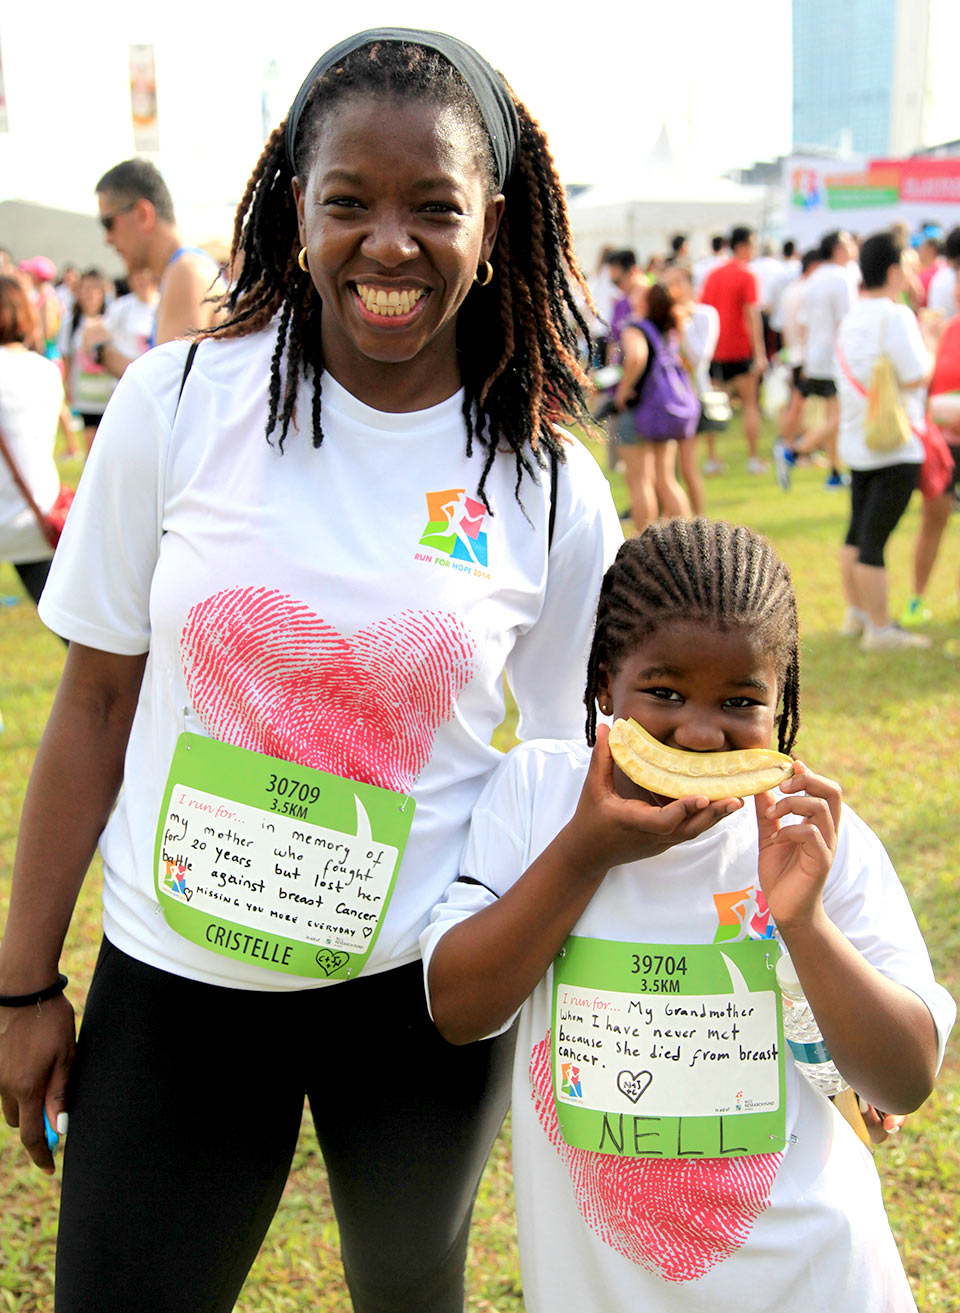 Run For Hope 2014: 11,000 Ran For A Cancer-Free Tomorrow